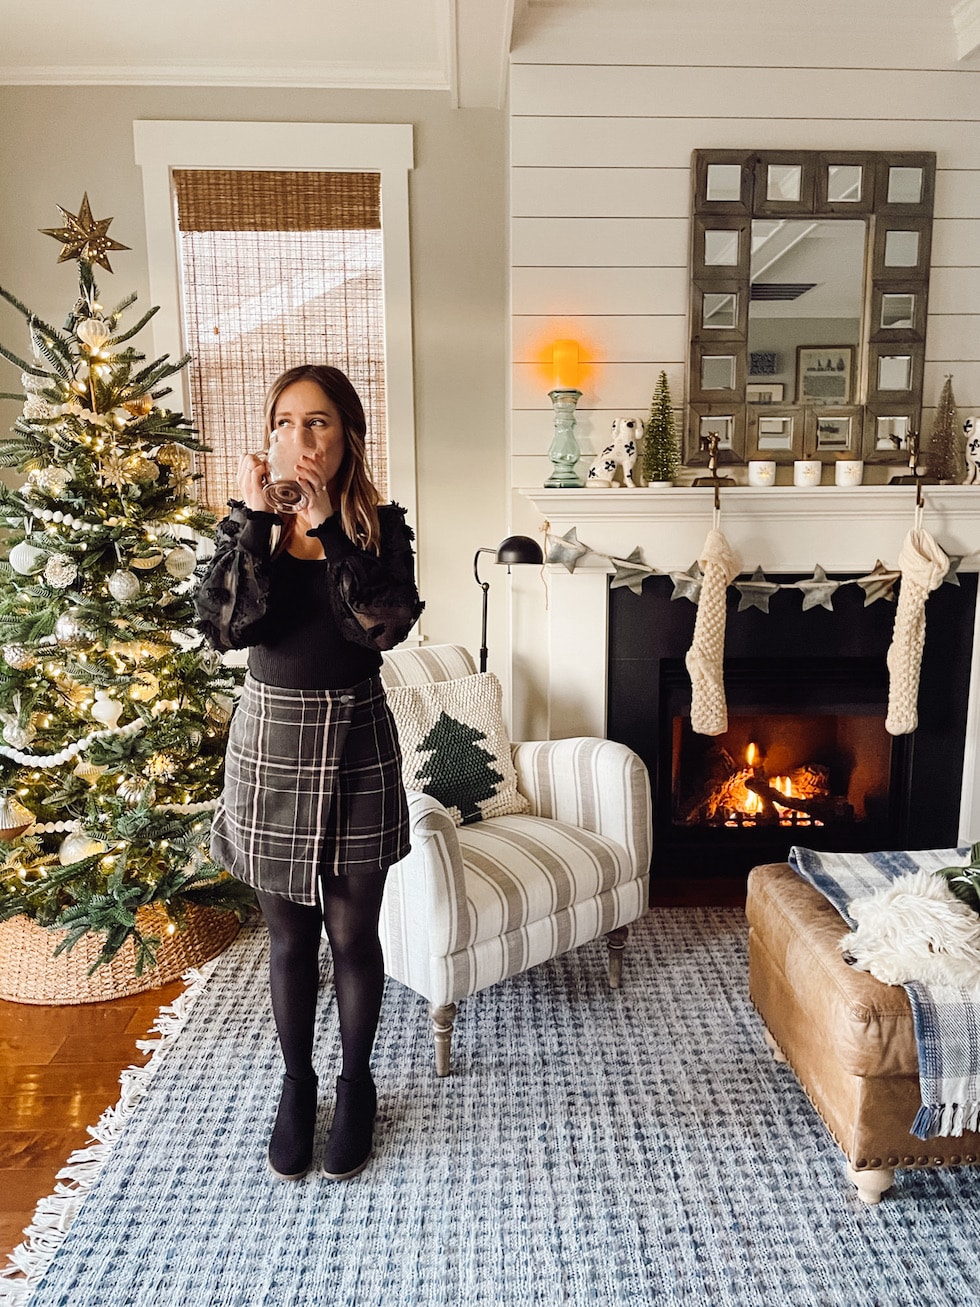 3 Fashionable Looks for Winter and Holidays